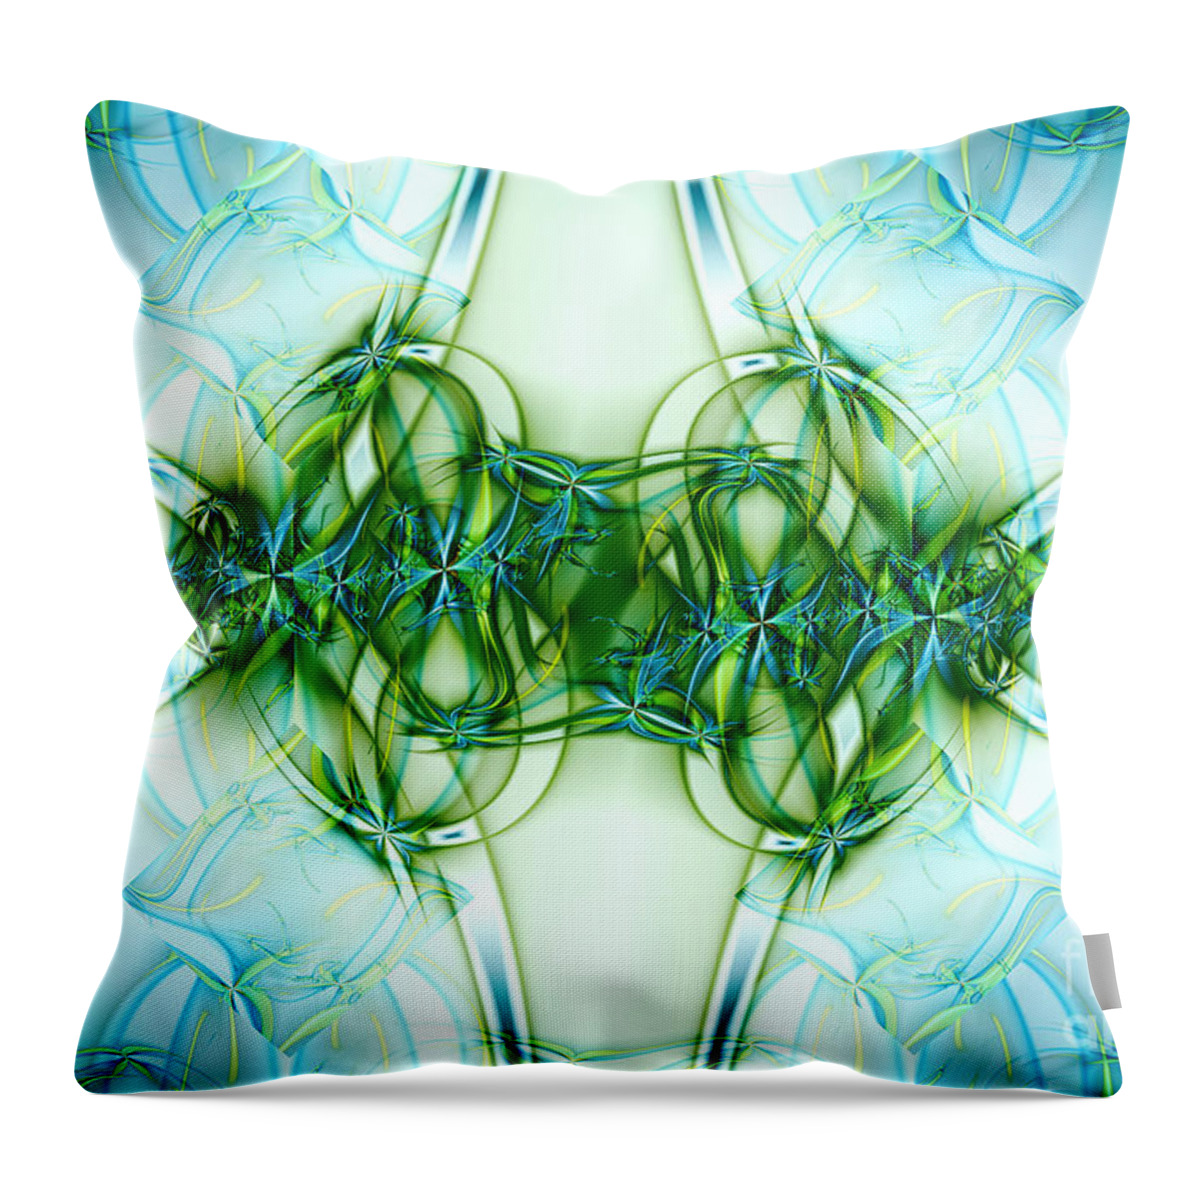 Fractal Throw Pillow featuring the digital art Stain Glass by Lena Auxier